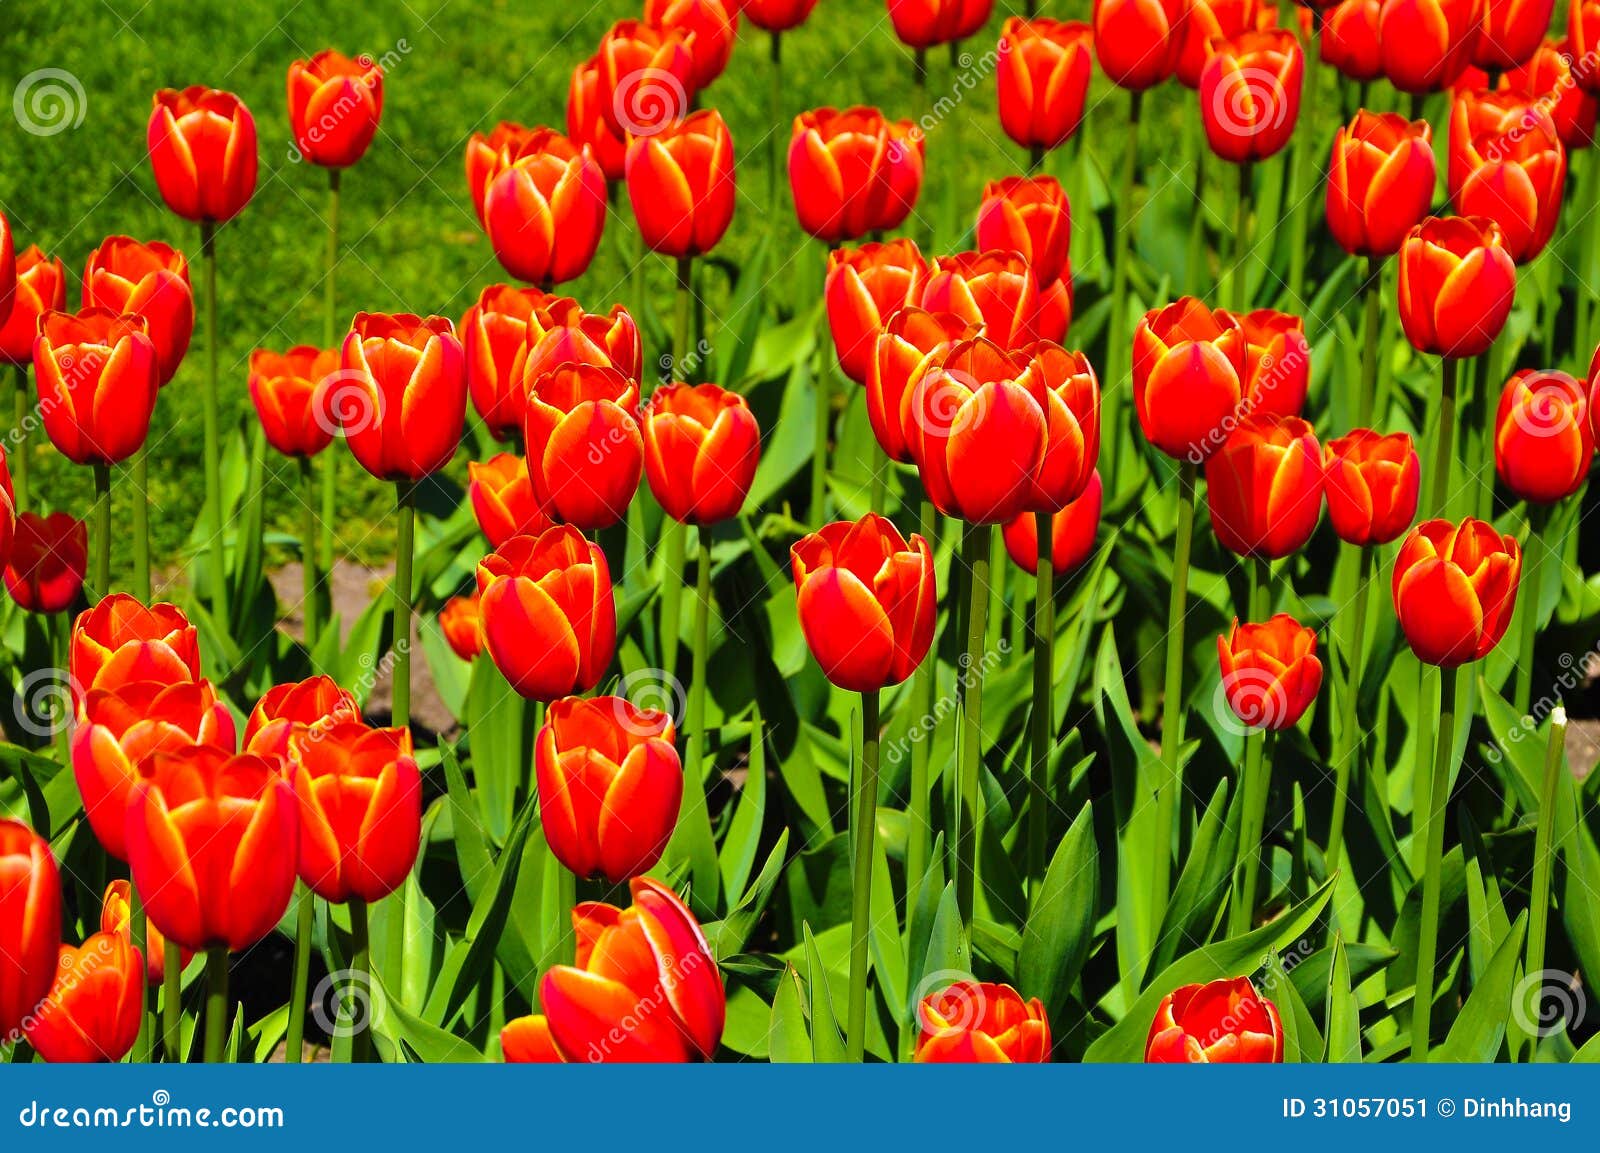 Red Tulips stock image. Image of branch, glass, blossom - 31057051